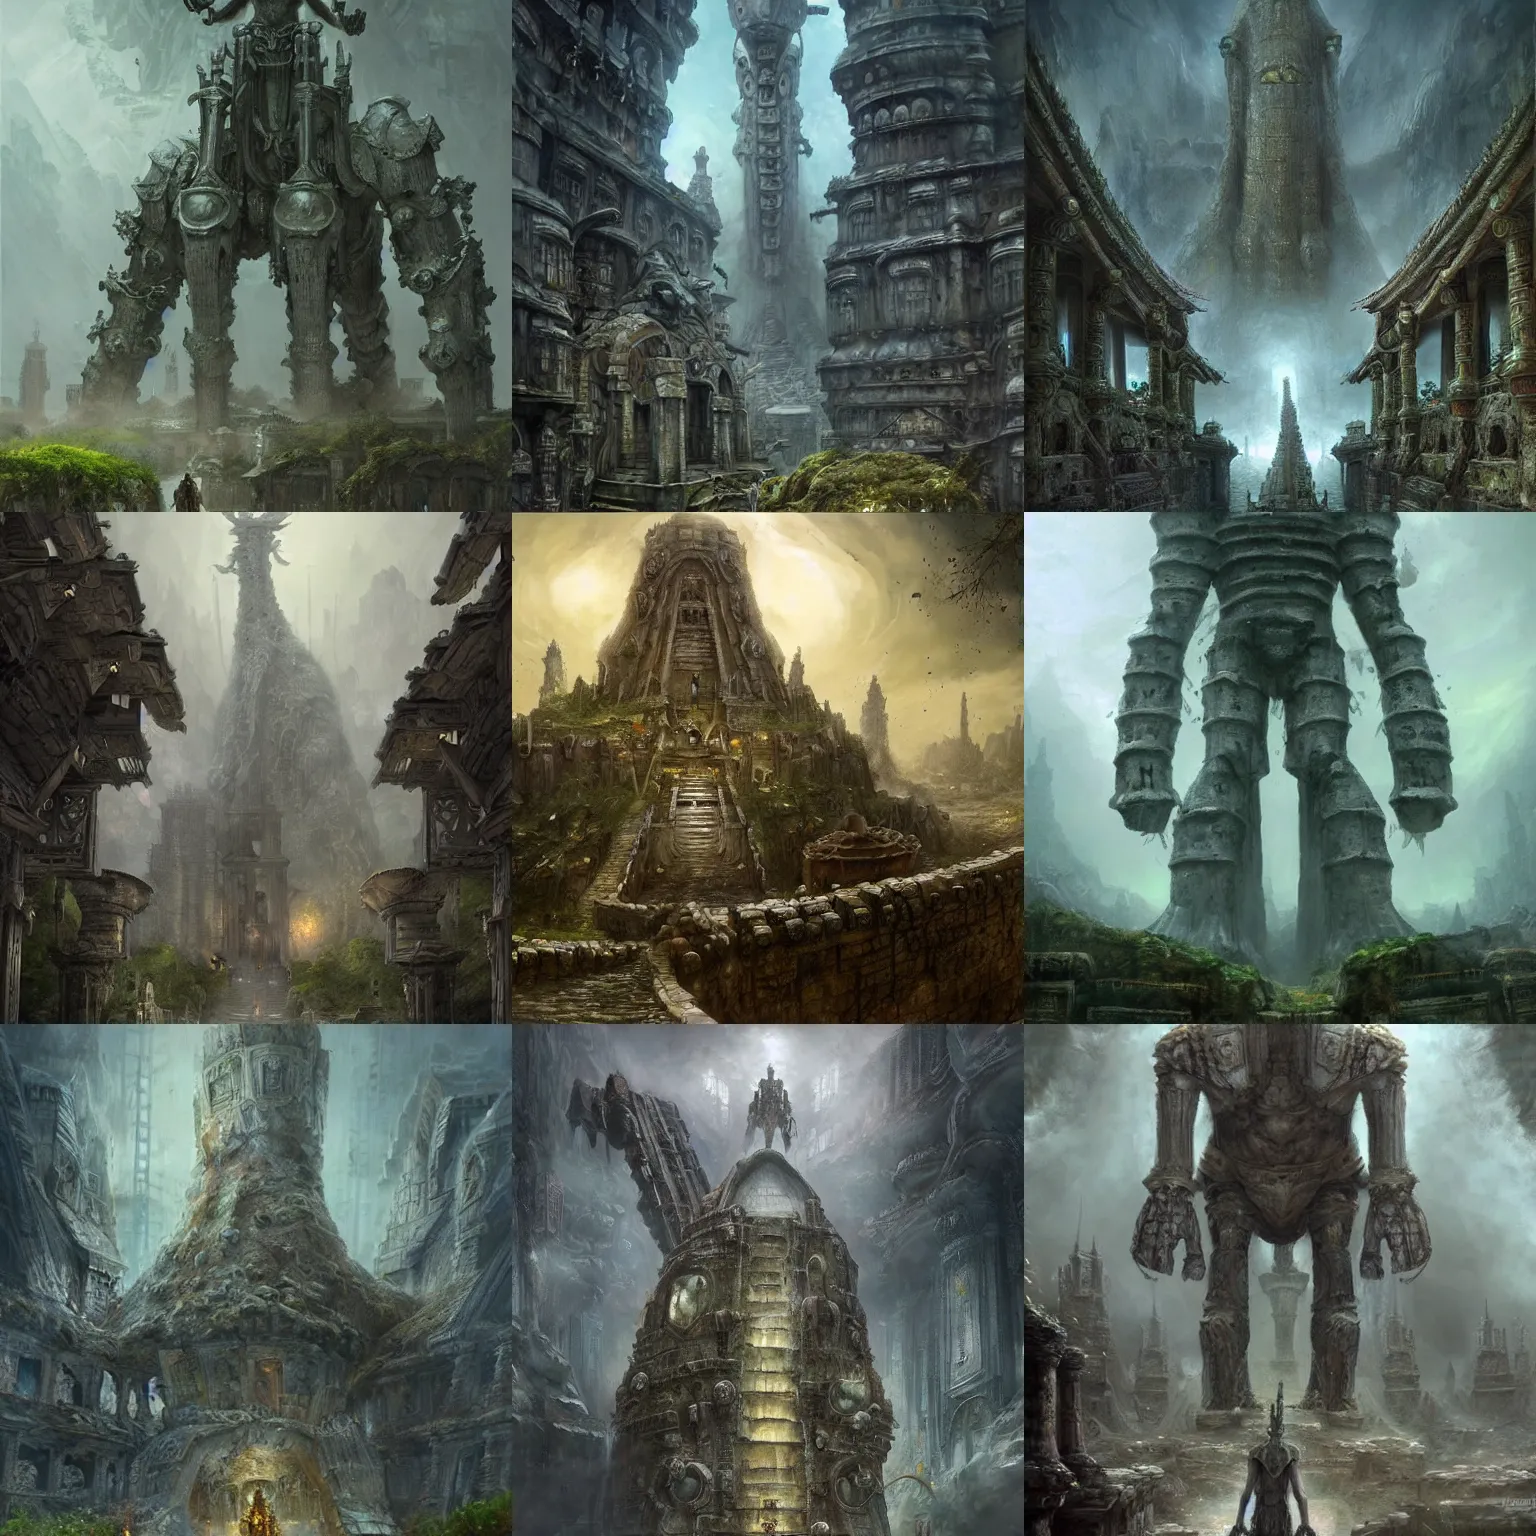 Prompt: massive iron golem guarding an ancient temple, in the style of bastien lecouffe - deharme, epic fantasy art, highly detailed and intricate, underground, depth of view, crumbled bridge in the background, moss on the walls